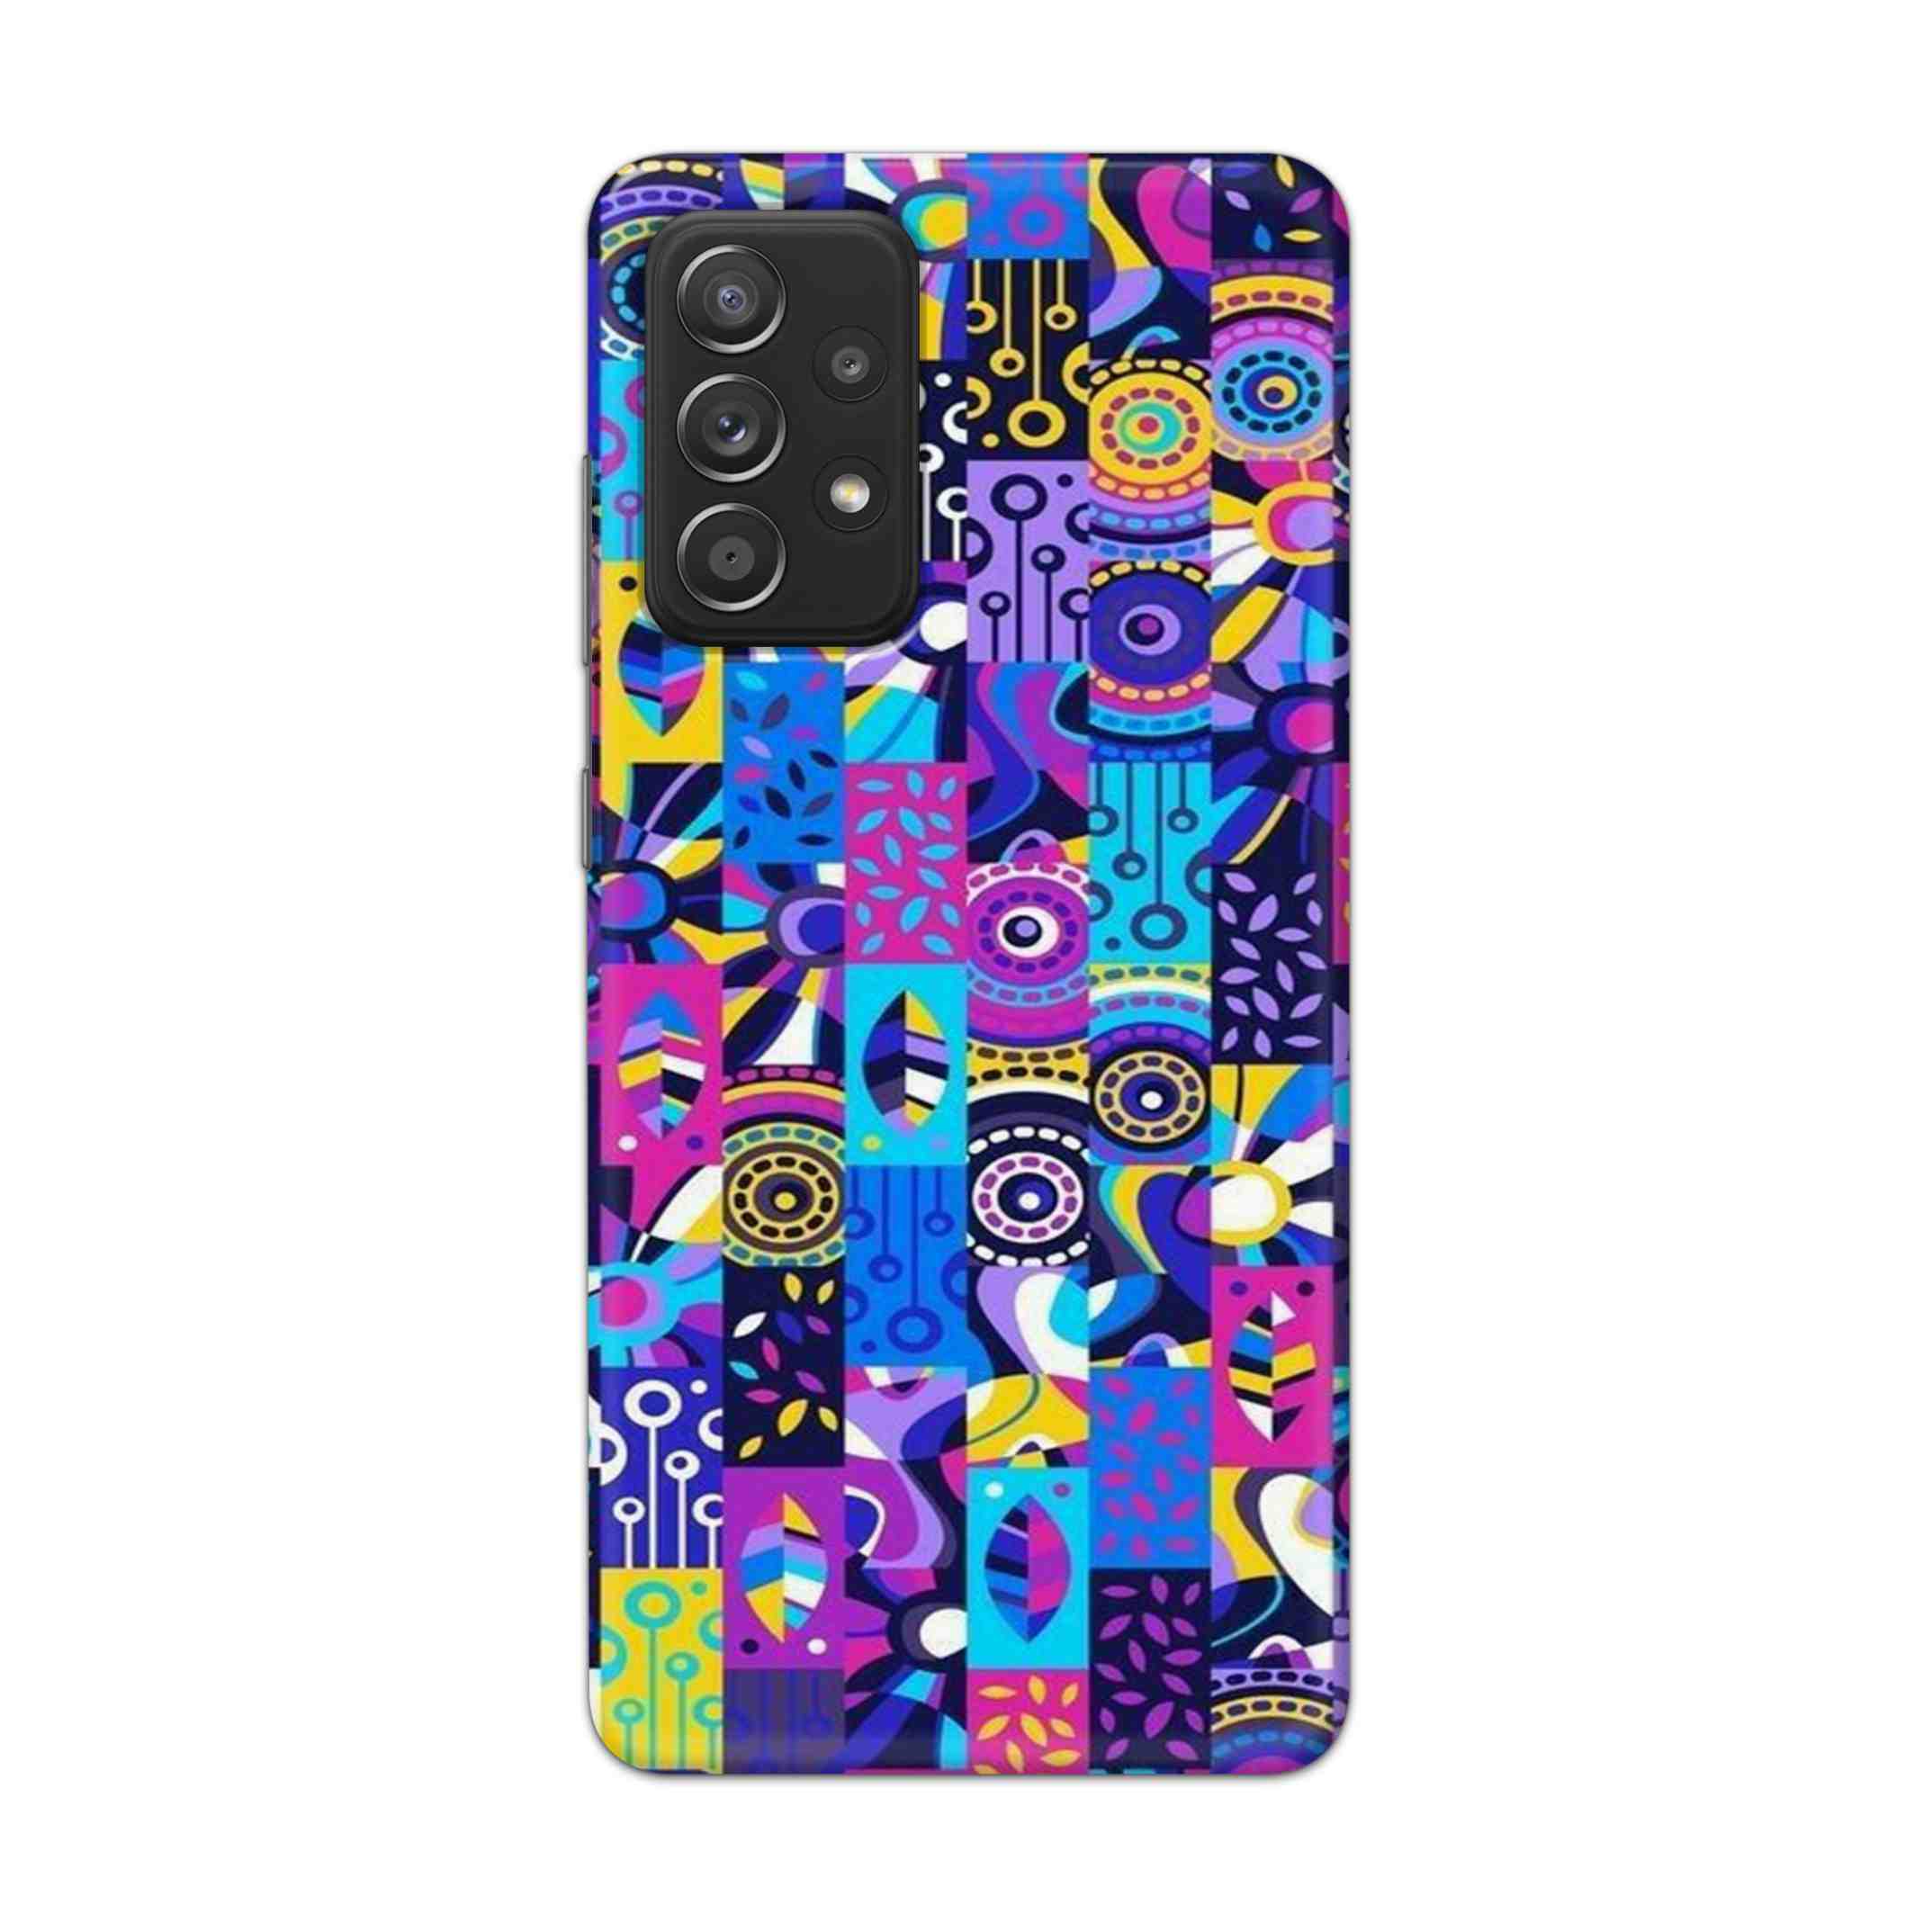 Buy Rainbow Art Hard Back Mobile Phone Case Cover For Samsung Galaxy A52 Online